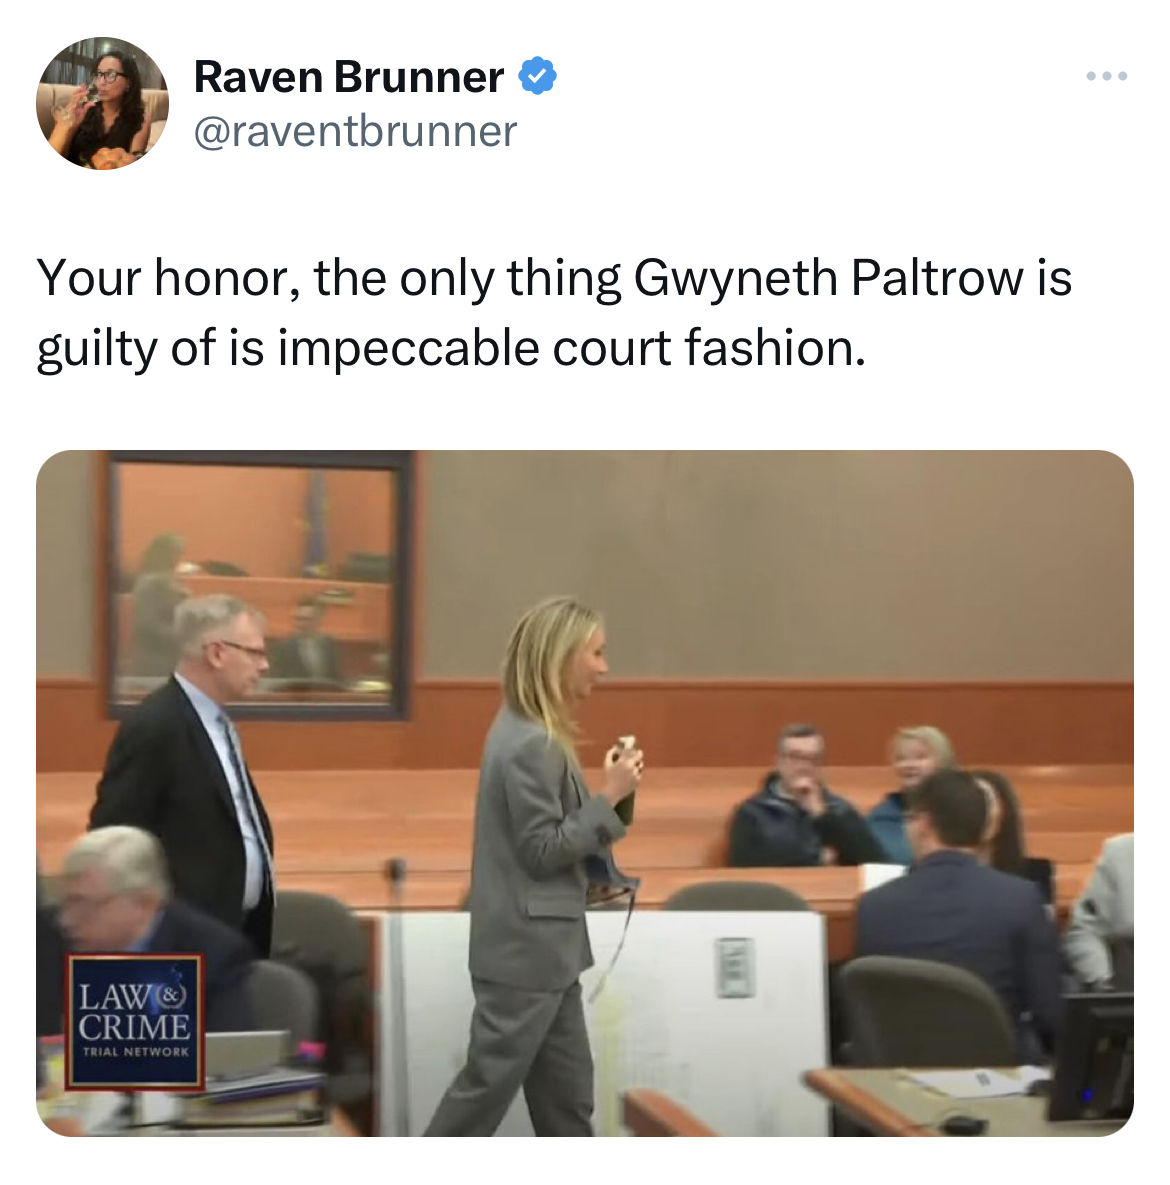 Gwyneth Paltrow Jeffrey Dahmer memes - presentation - Raven Brunner Your honor, the only thing Gwyneth Paltrow is guilty of is impeccable court fashion. Law Crime Trial Network Inkk